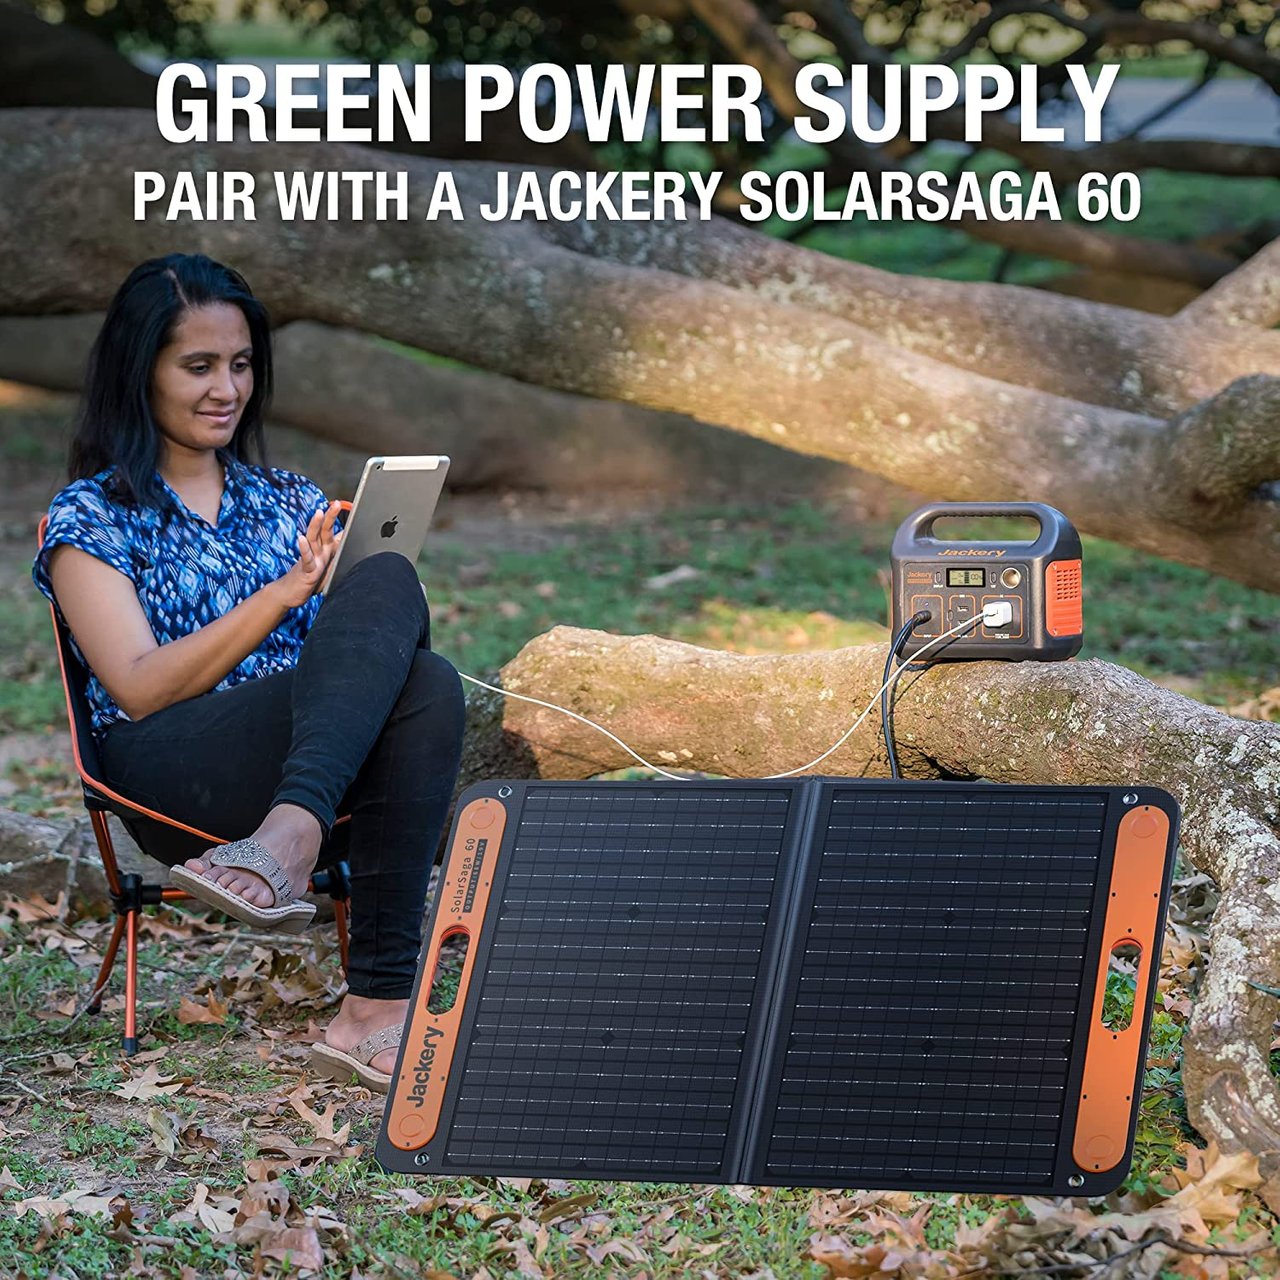 6 Explorer 240 Portable Power Station by Jackery